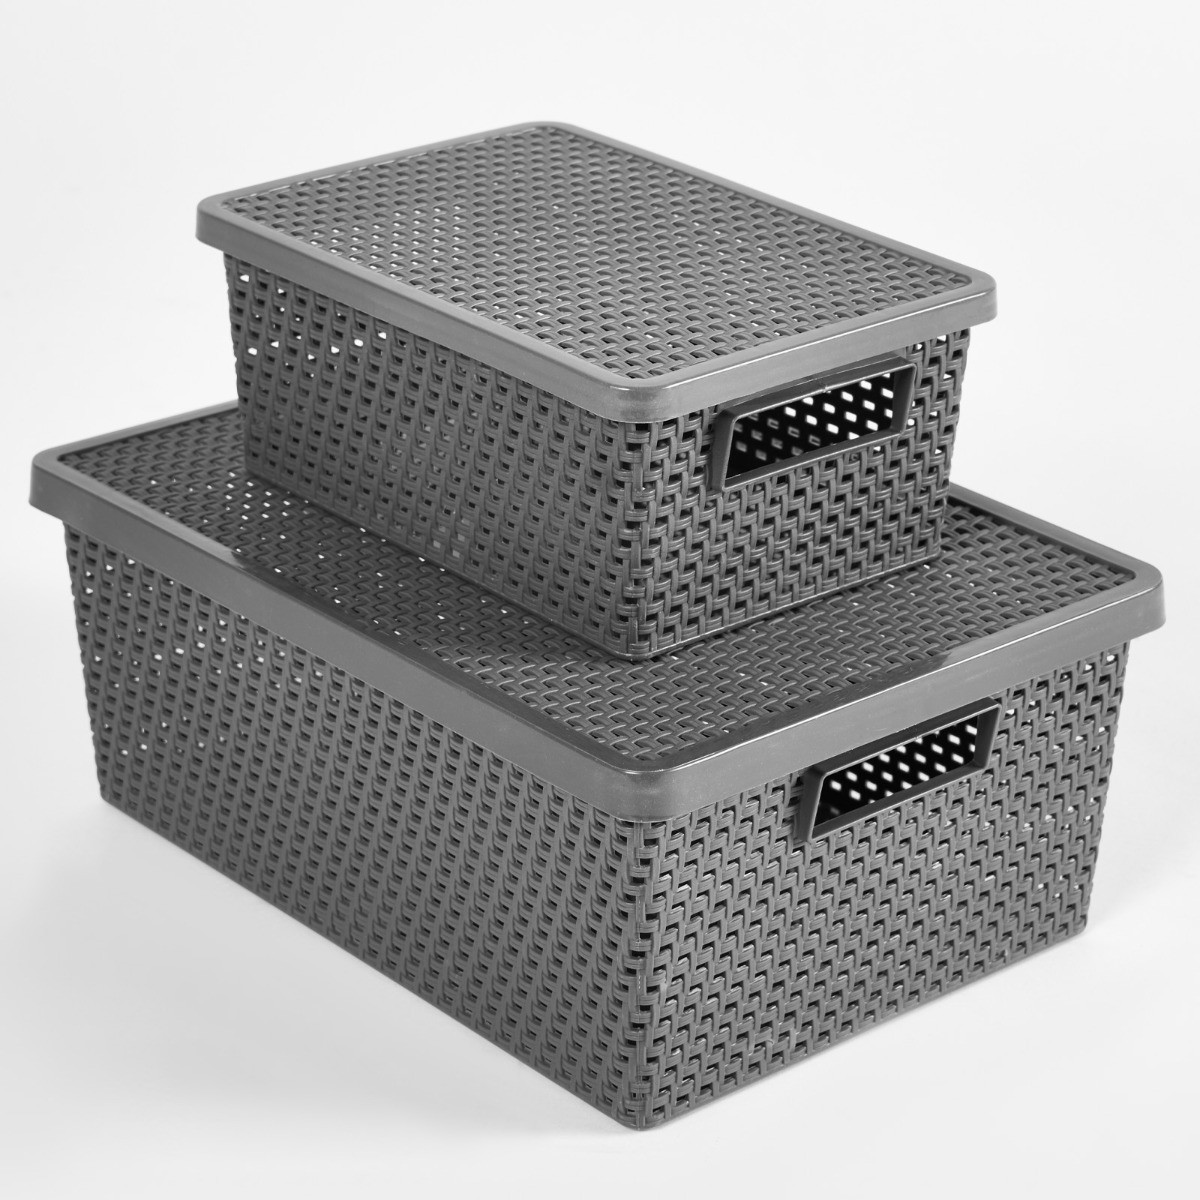 OHS Plastic Storage Boxes With Lid, Charcoal - 2 Pack>